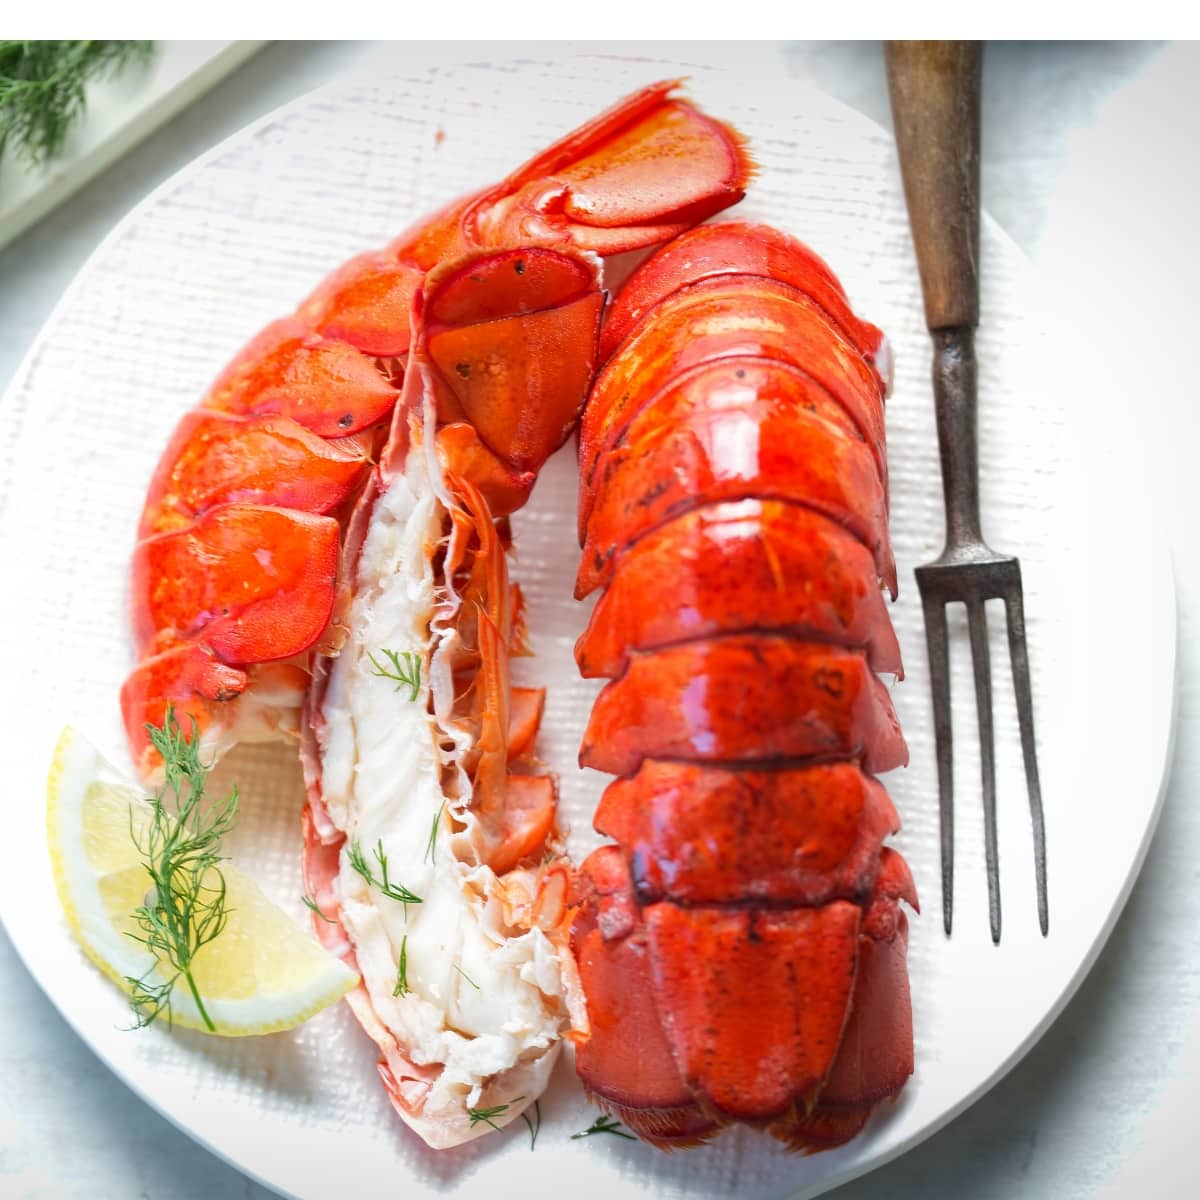 Cooked Lobster Served on a Plate